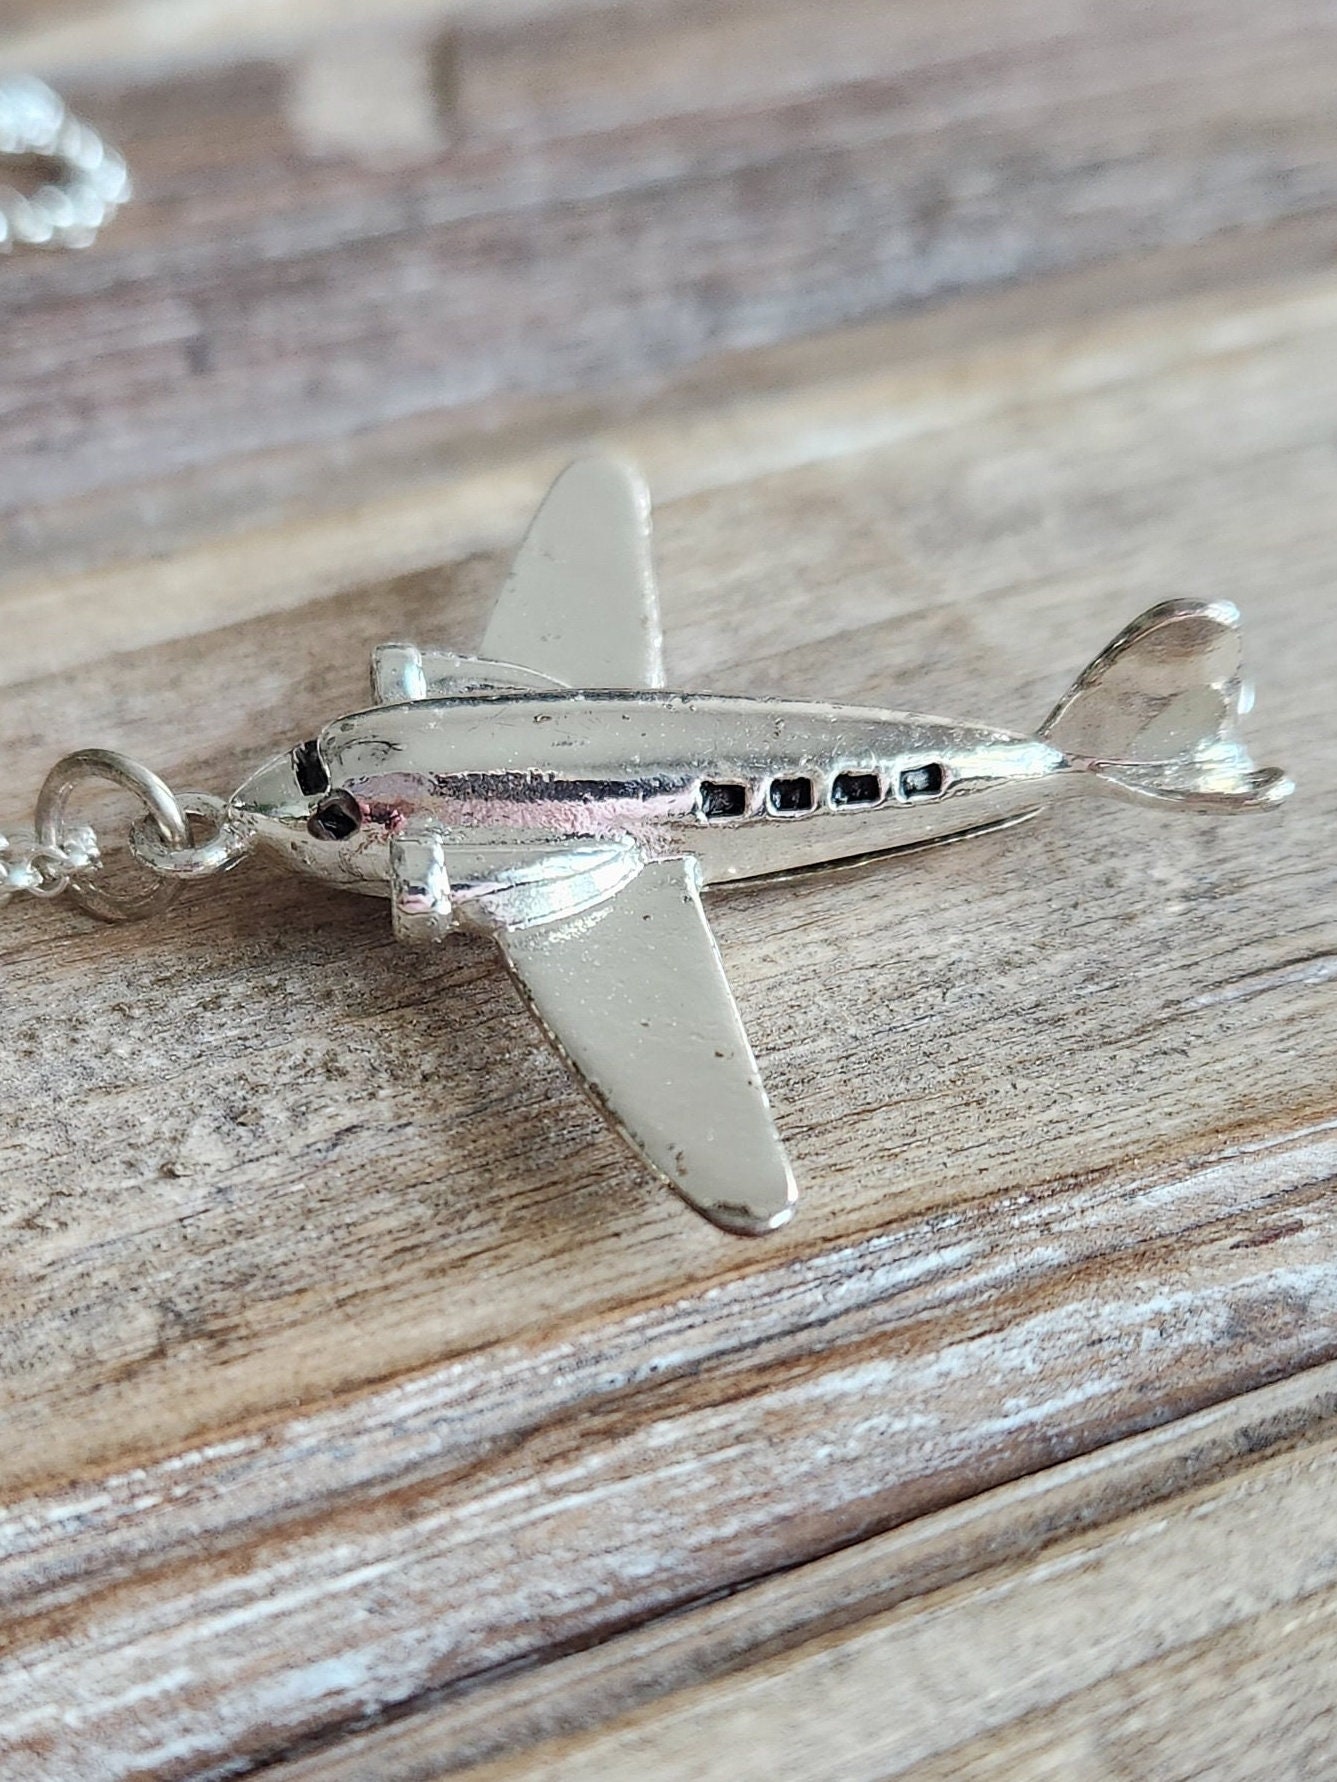 925 sterling silver small airplane necklace airplane airplane travel  tourism - Shop everydayisagift Necklaces - Pinkoi